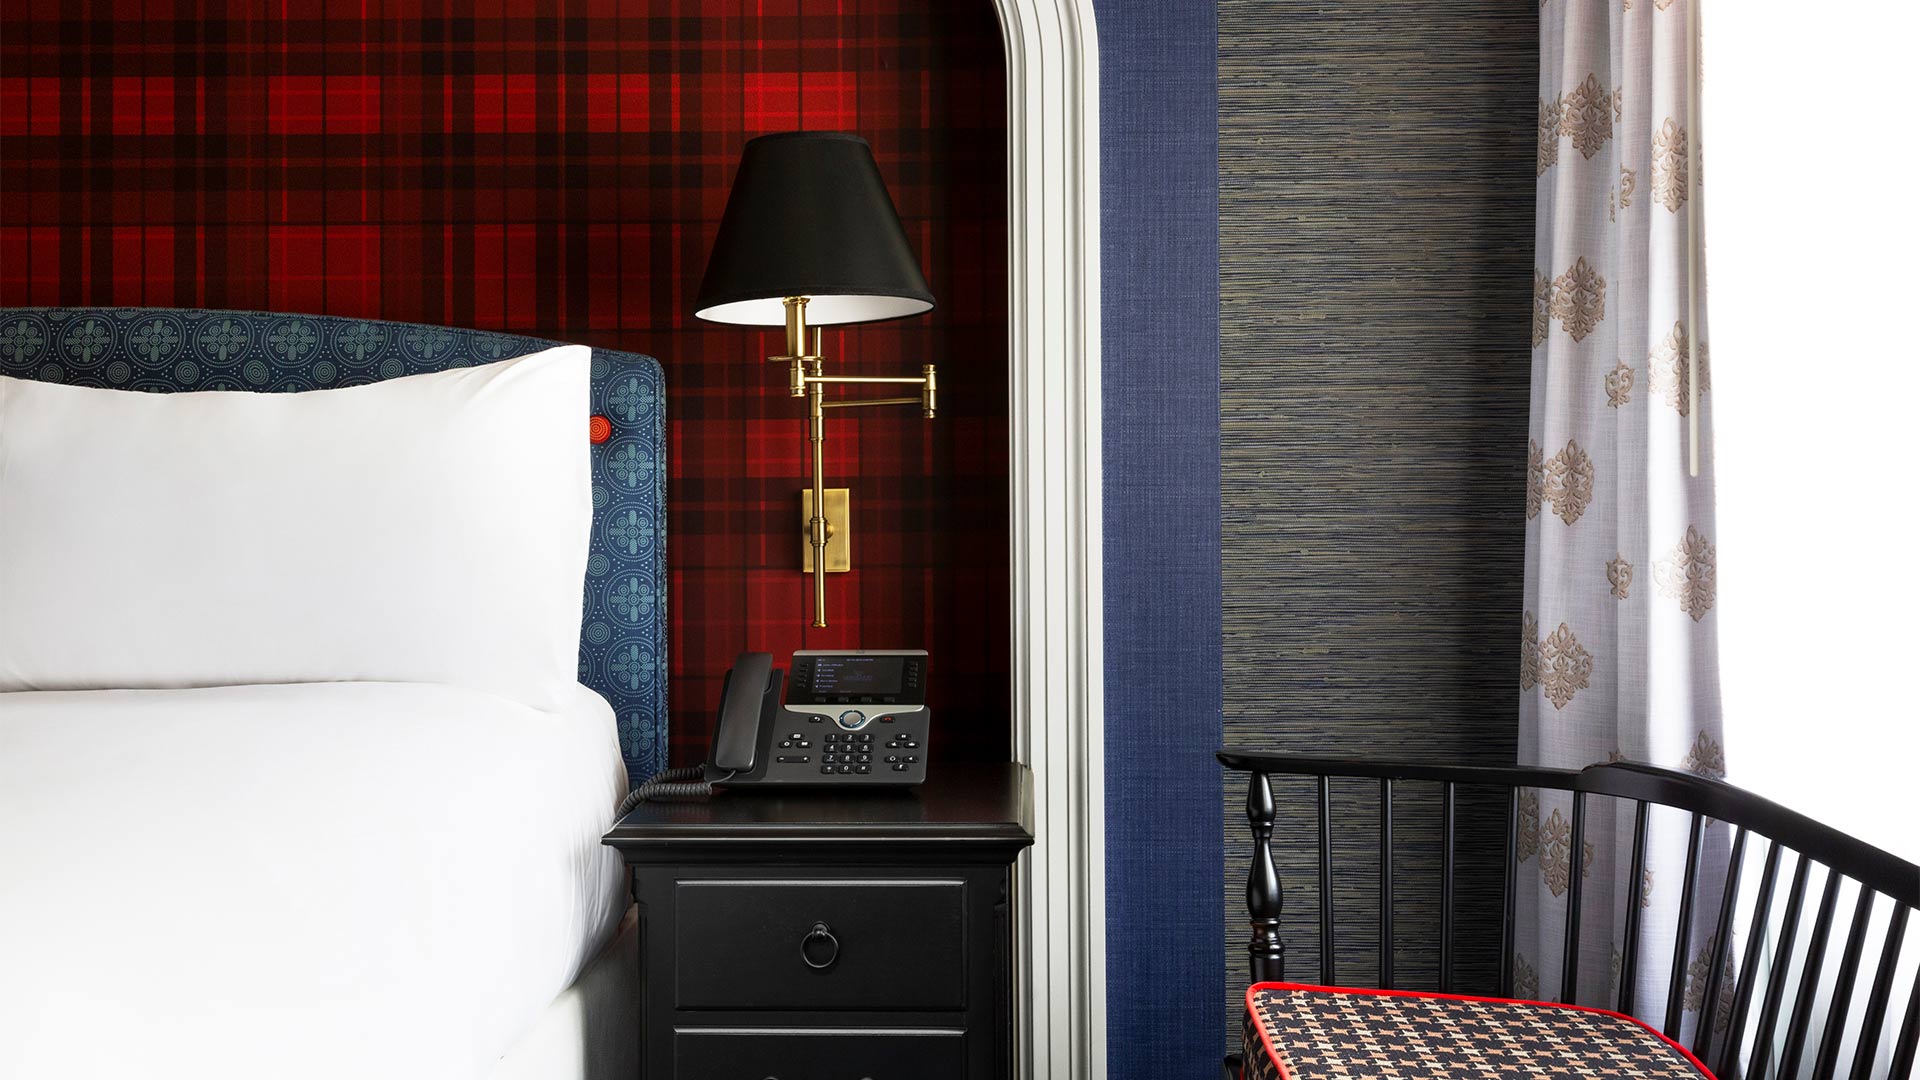 detail shot of one of the townhomes' bedrooms. The bed has crisp white bedding, the wall behind the bed is a cozy buffalo plaid pattern. There is a nightstand, a lamp and a chair to the right of the bed.